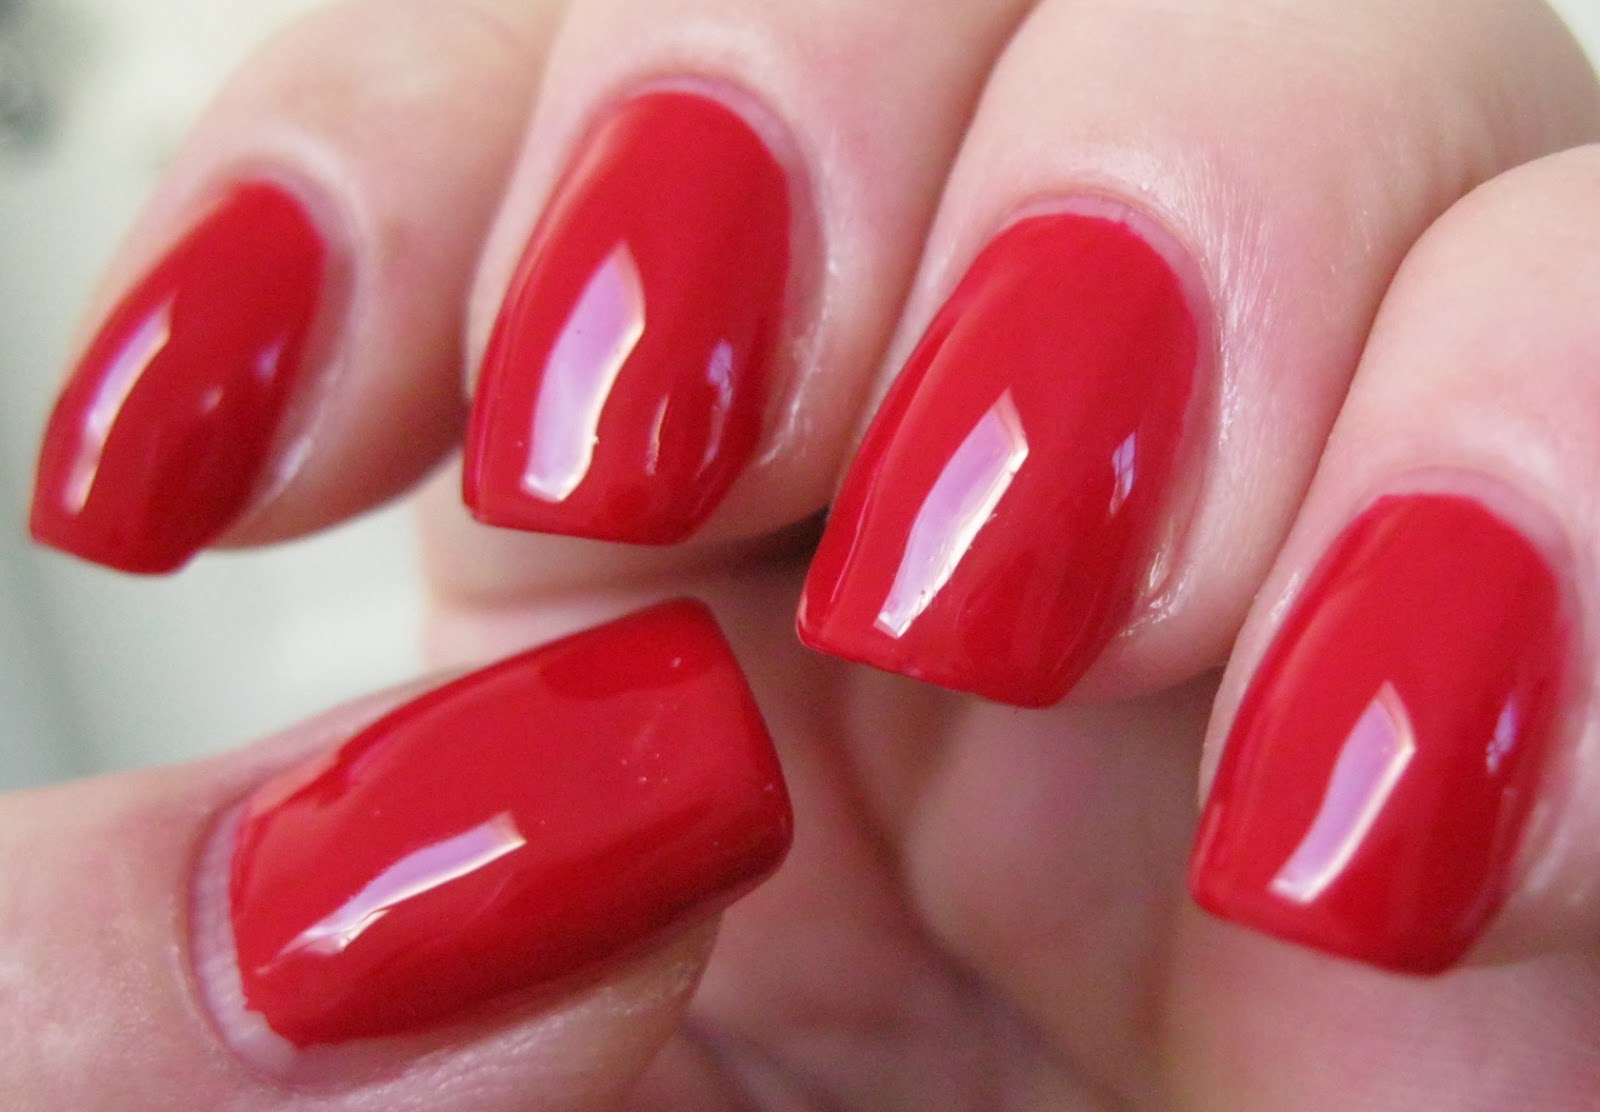 5. "Butter London Come to Bed Red" - wide 1